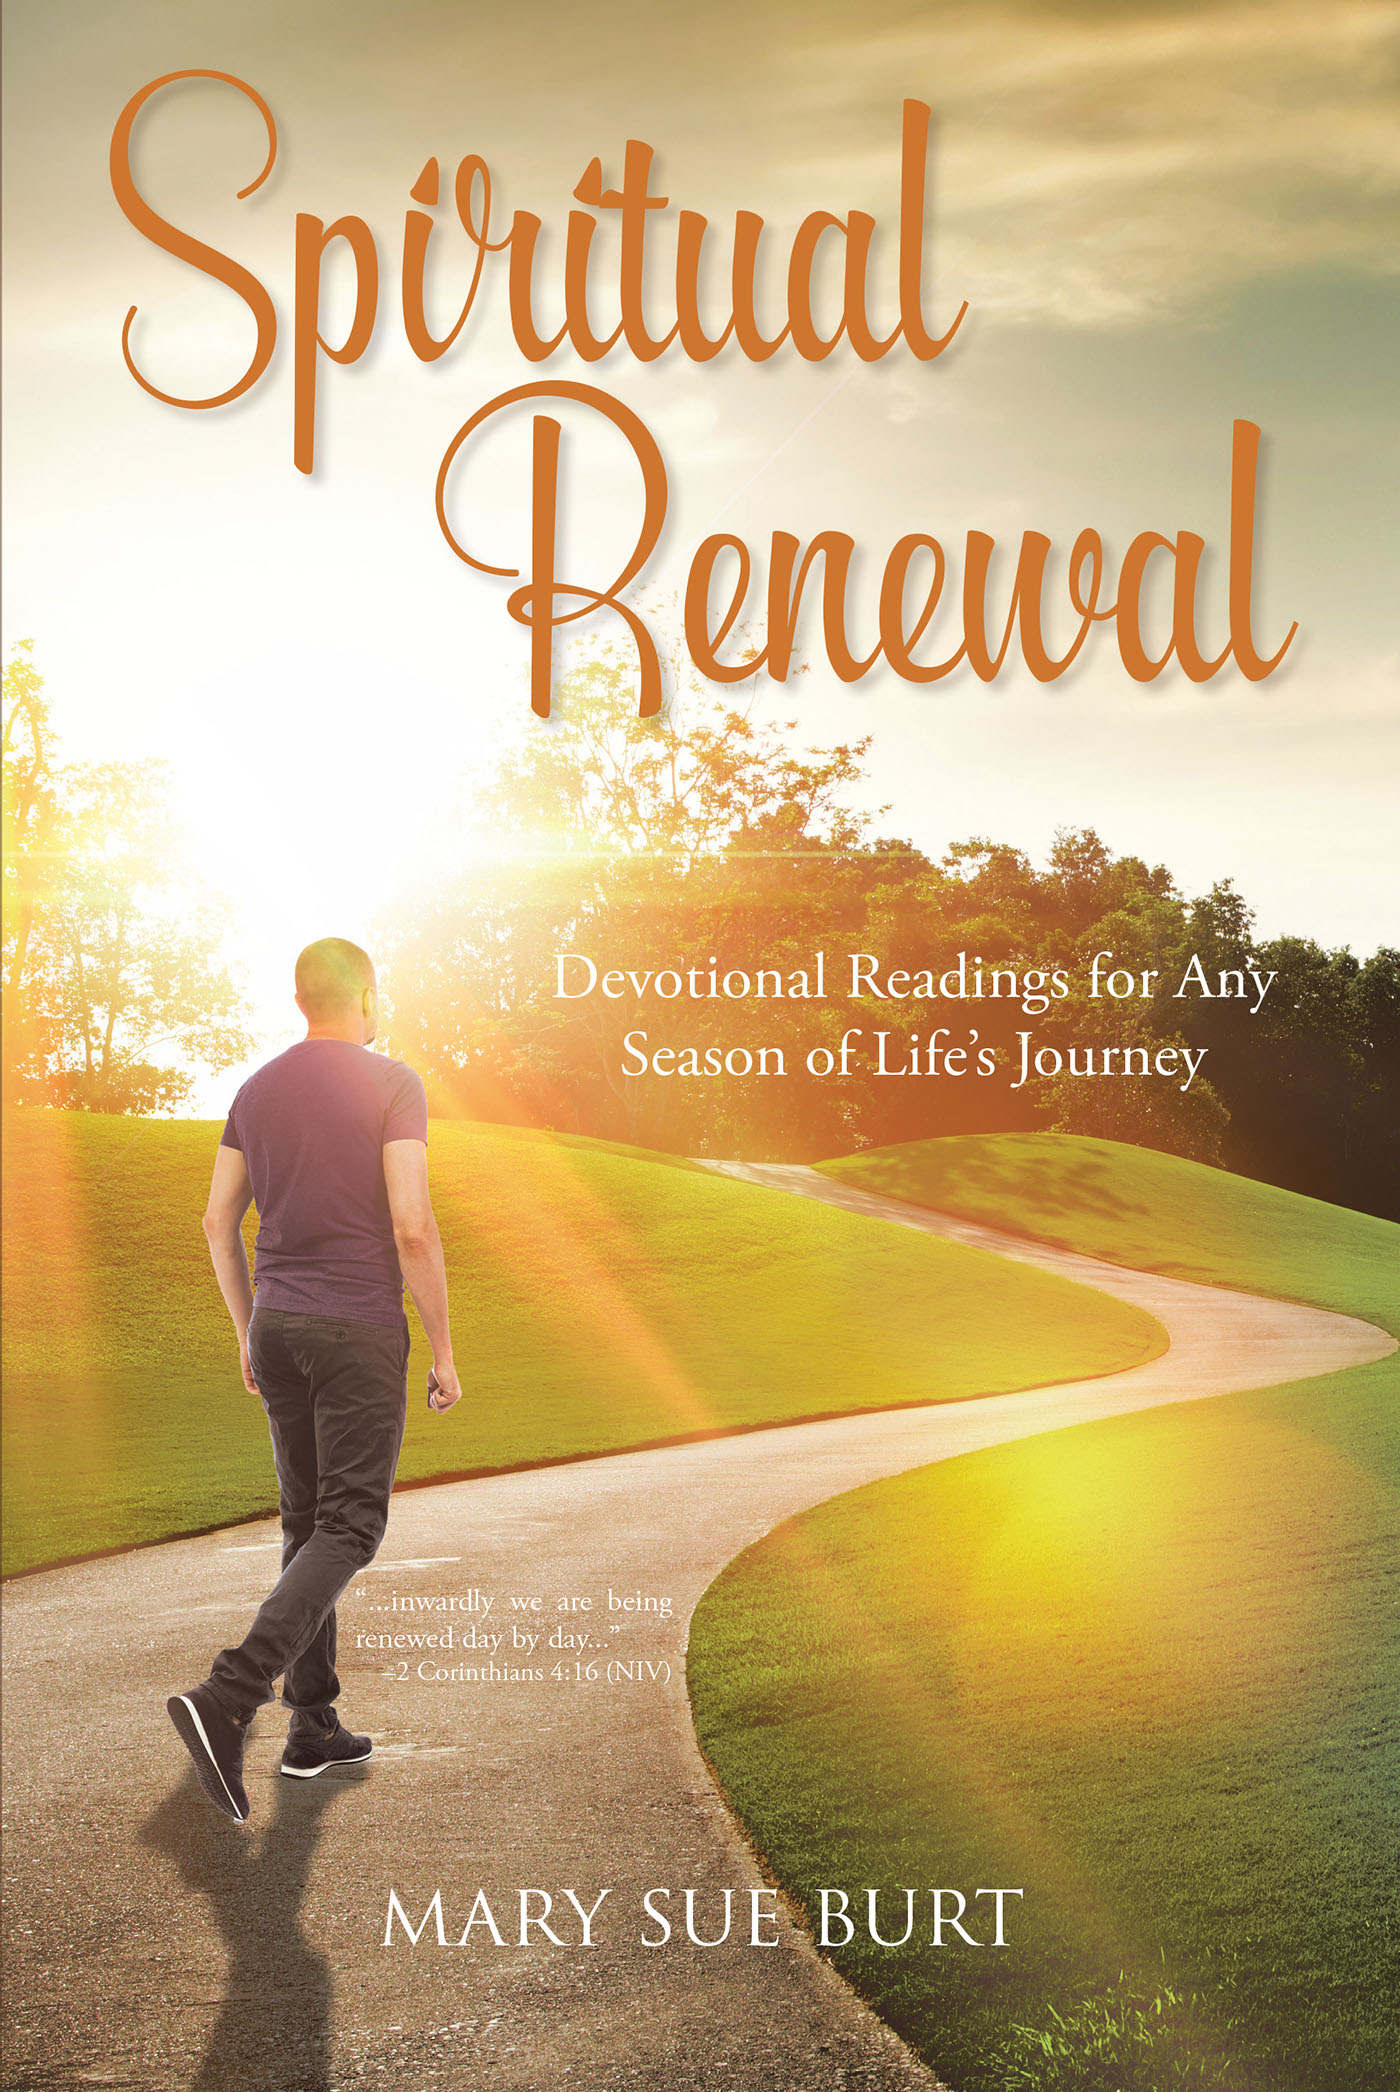 Mary Sue Burt’s Newly Released "Spiritual Renewal: Devotional Readings for Any Season of Life’s Journey" is an Engaging Collection of 240 Devotional Readings